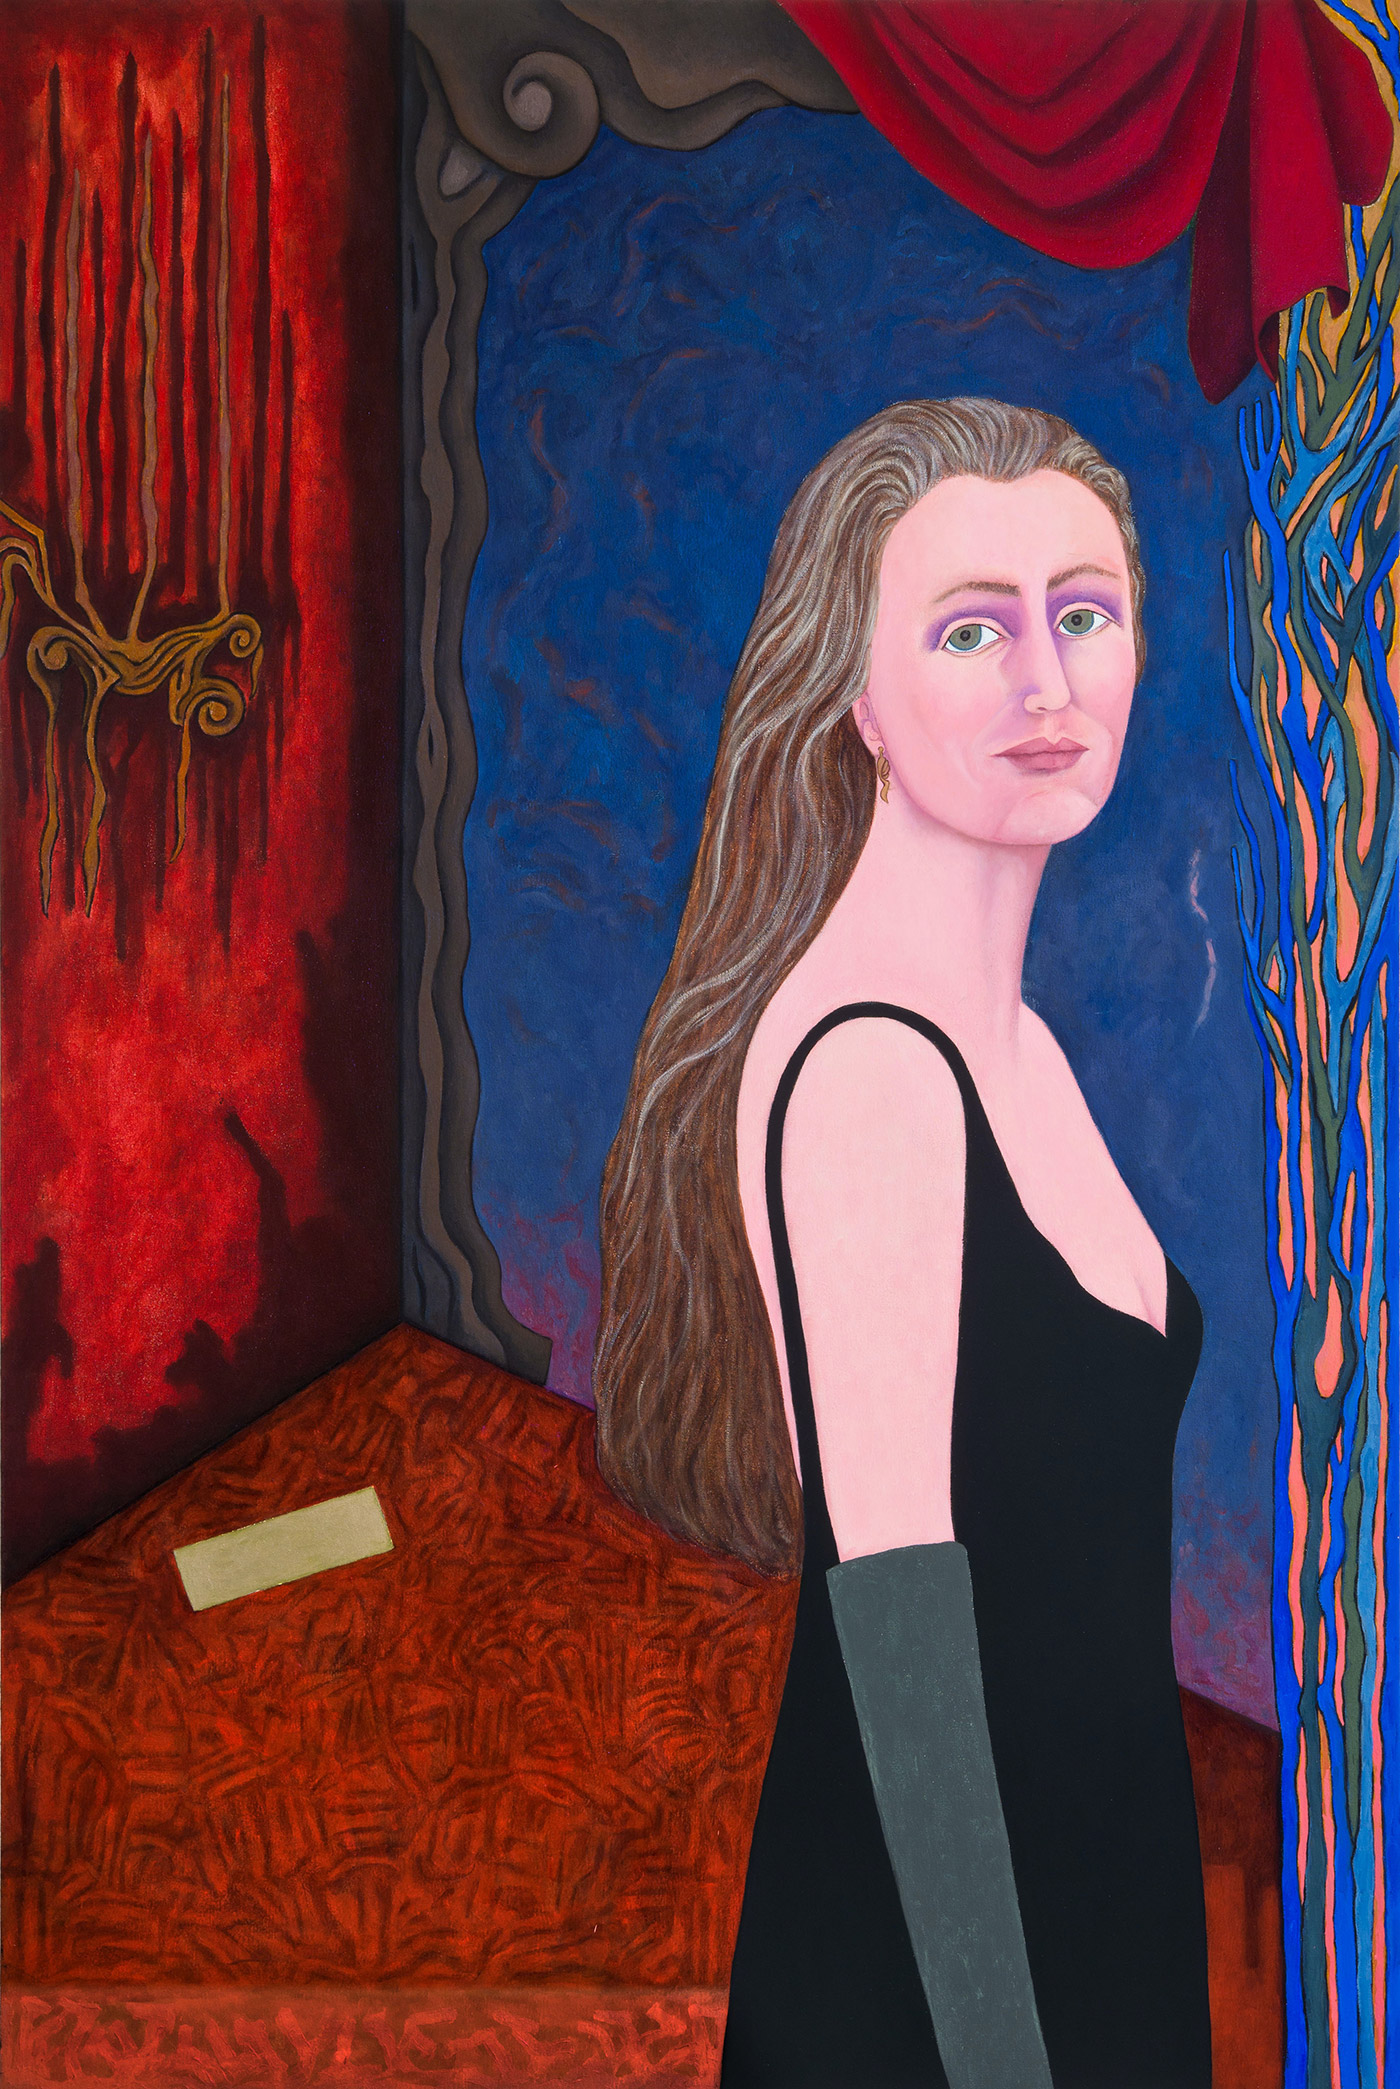 Diane, 2015 | 60" x 40" | Oil & Acrylic on Canvas | Collection of Diane Hersey, New York